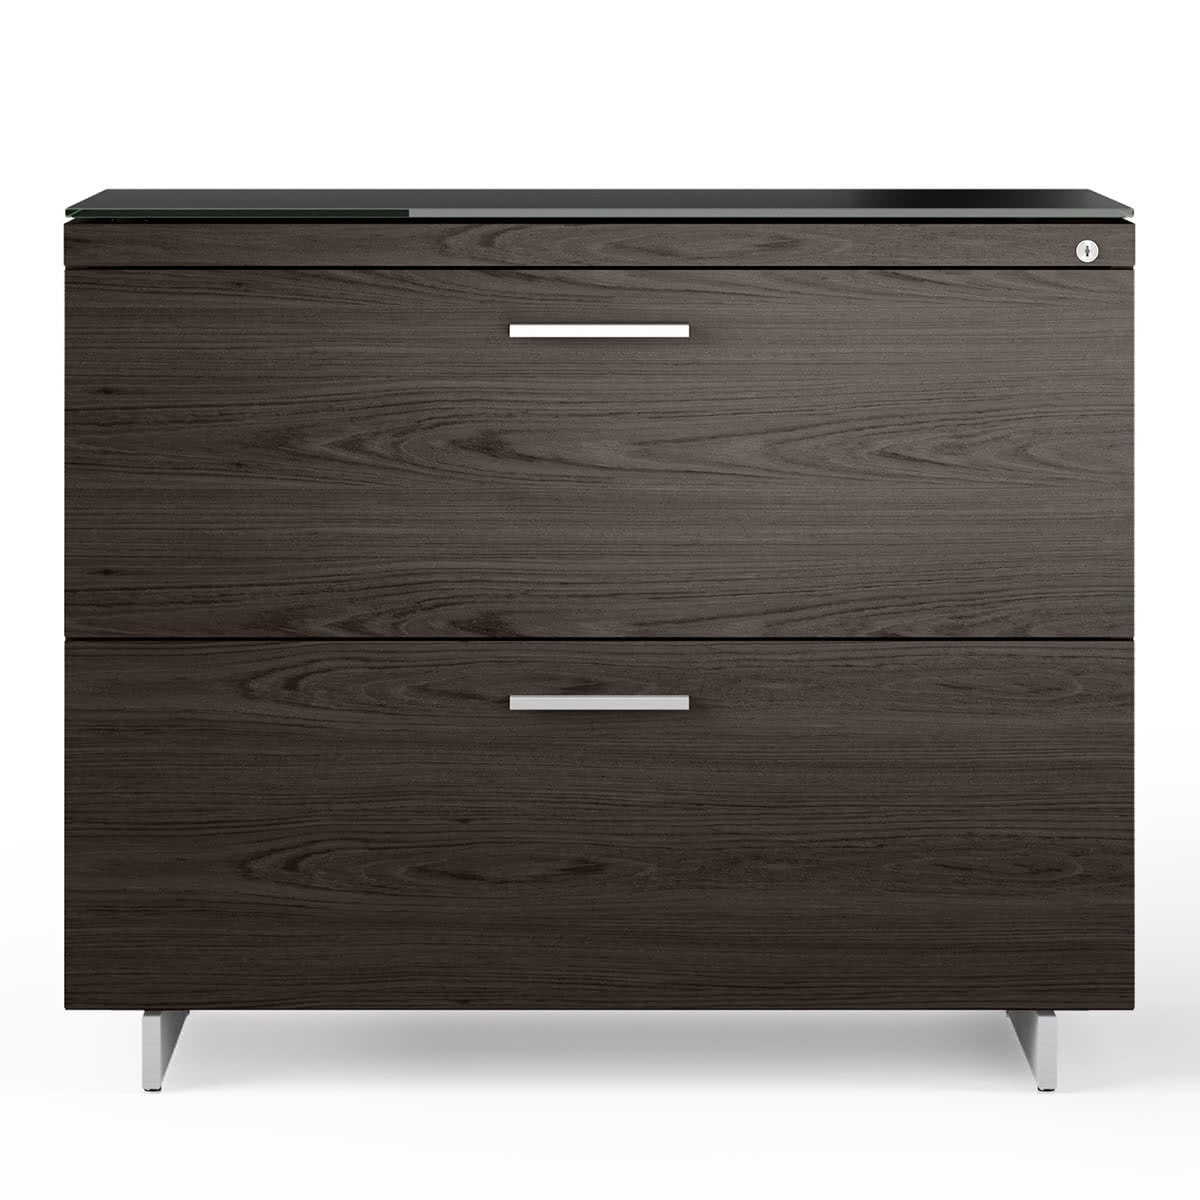 BDI Sequel 20 6116 Lateral File Cabinet (Charcoal/Nickel)